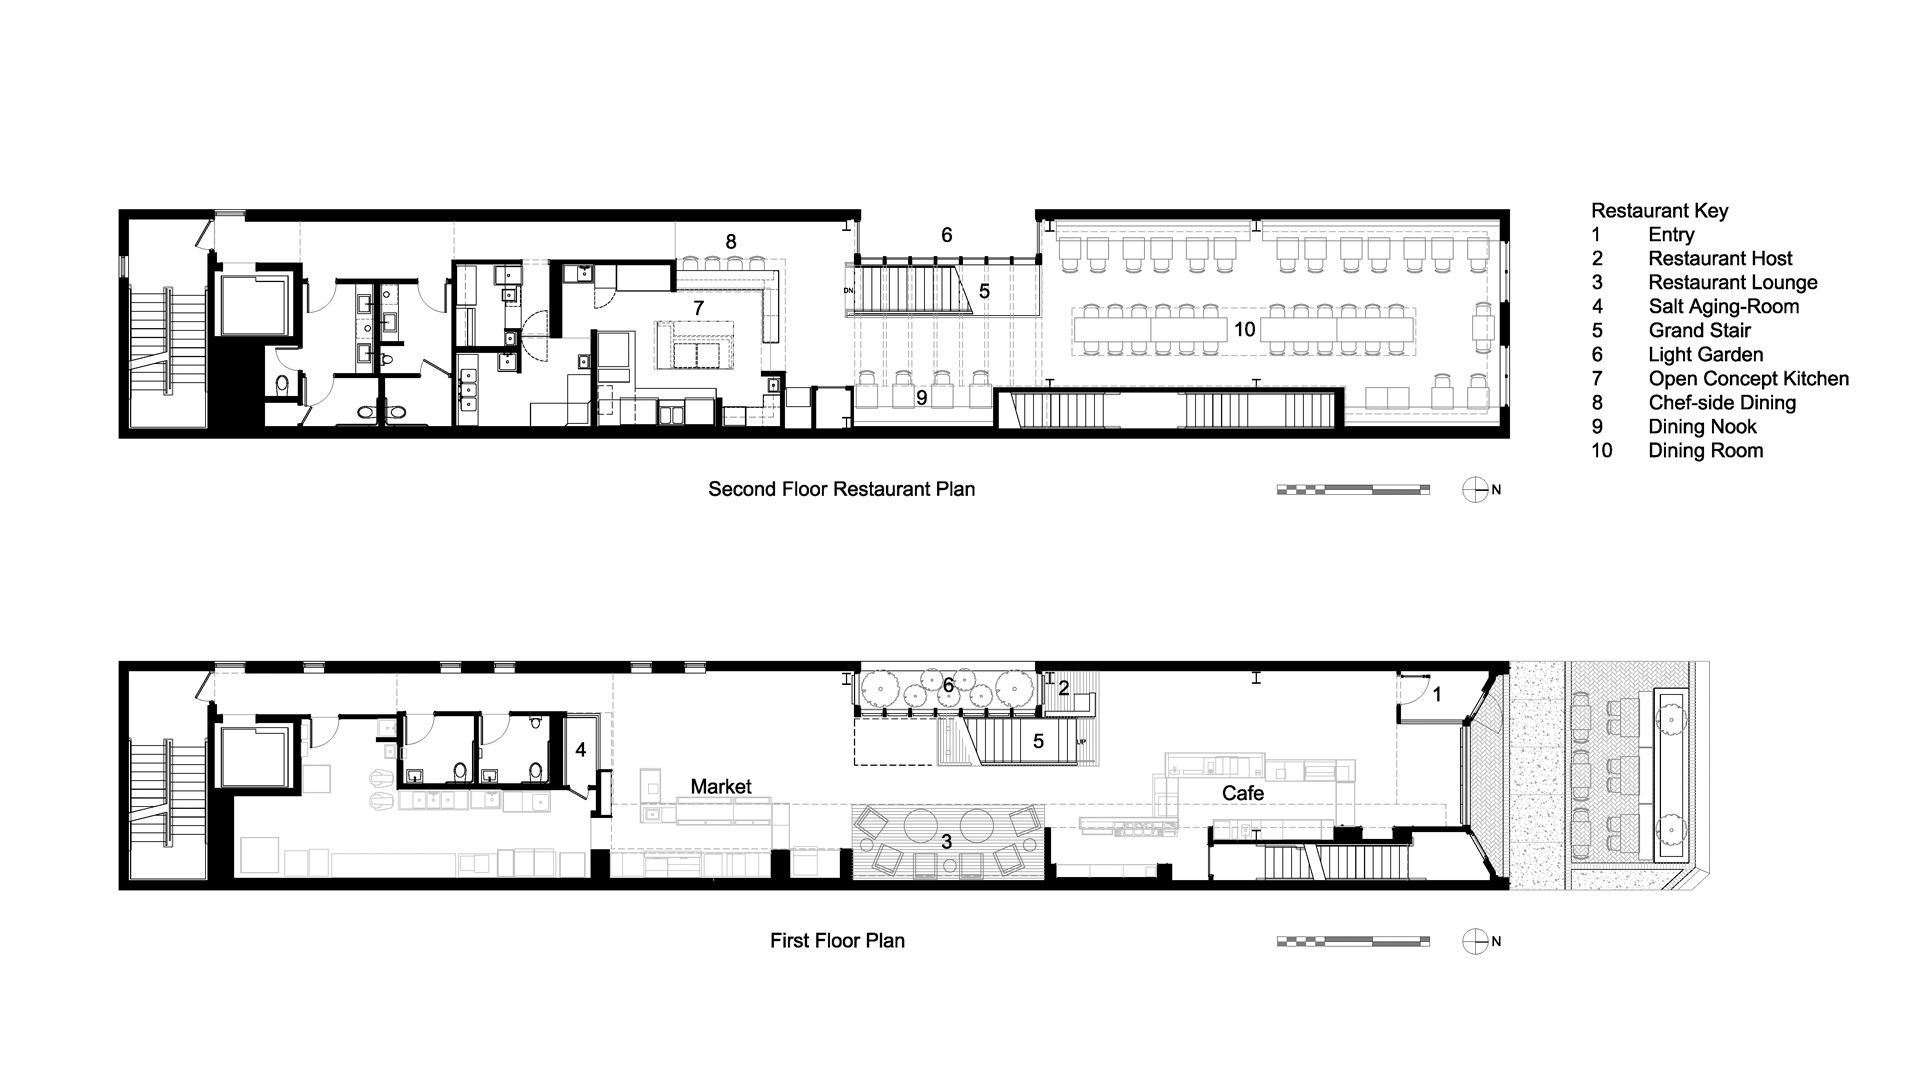 Preliminary price drawings created by Chicago architect